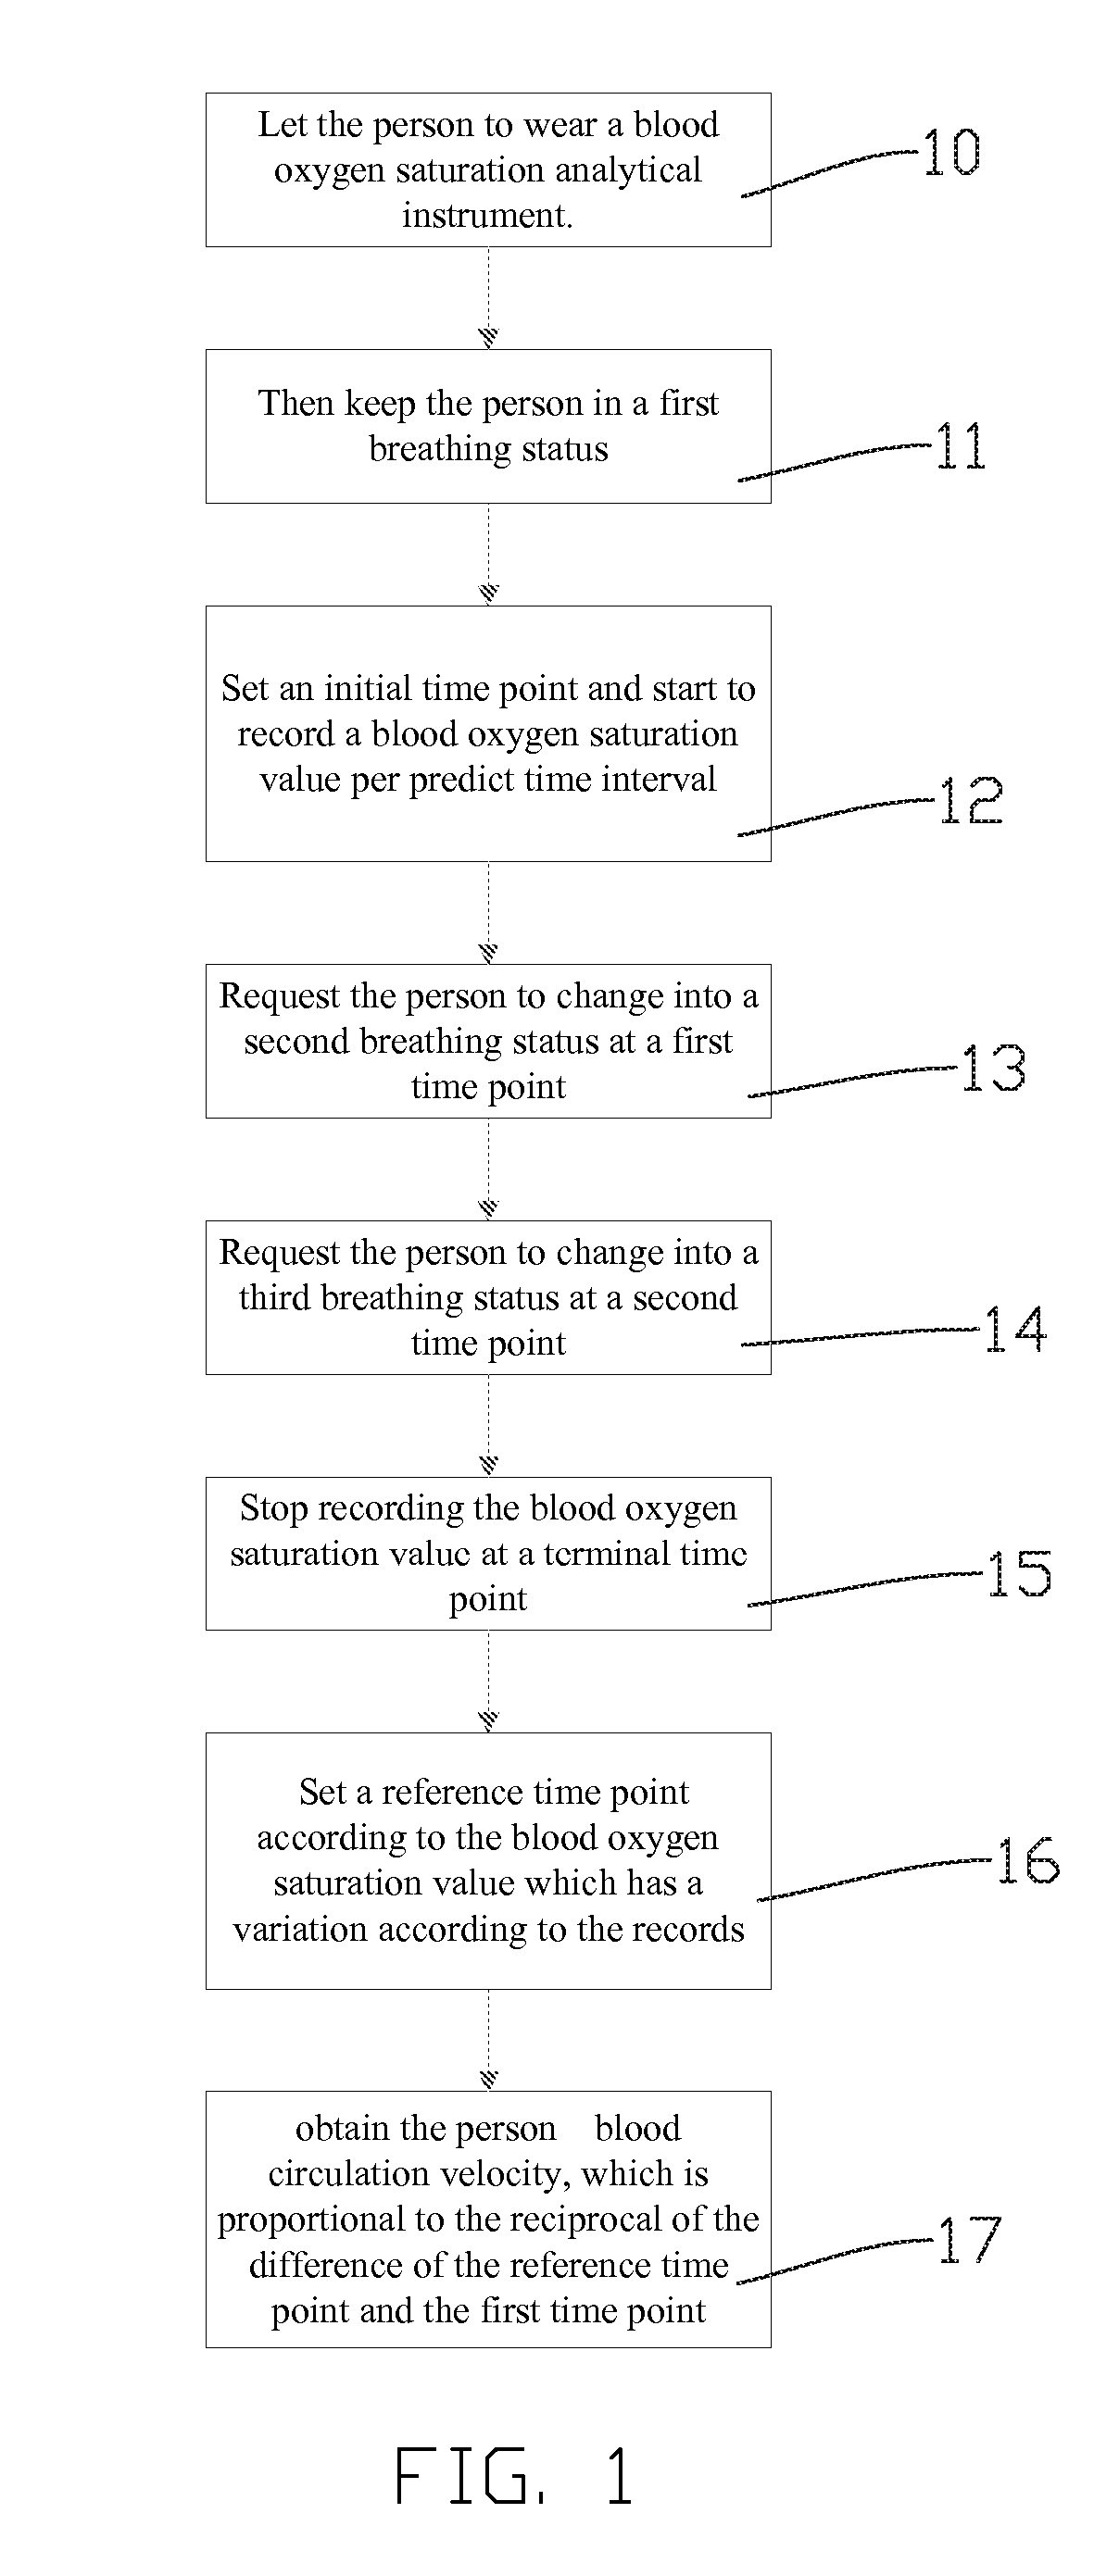 Method of Measuring Blood Circulation Velocity by Controlling Breath